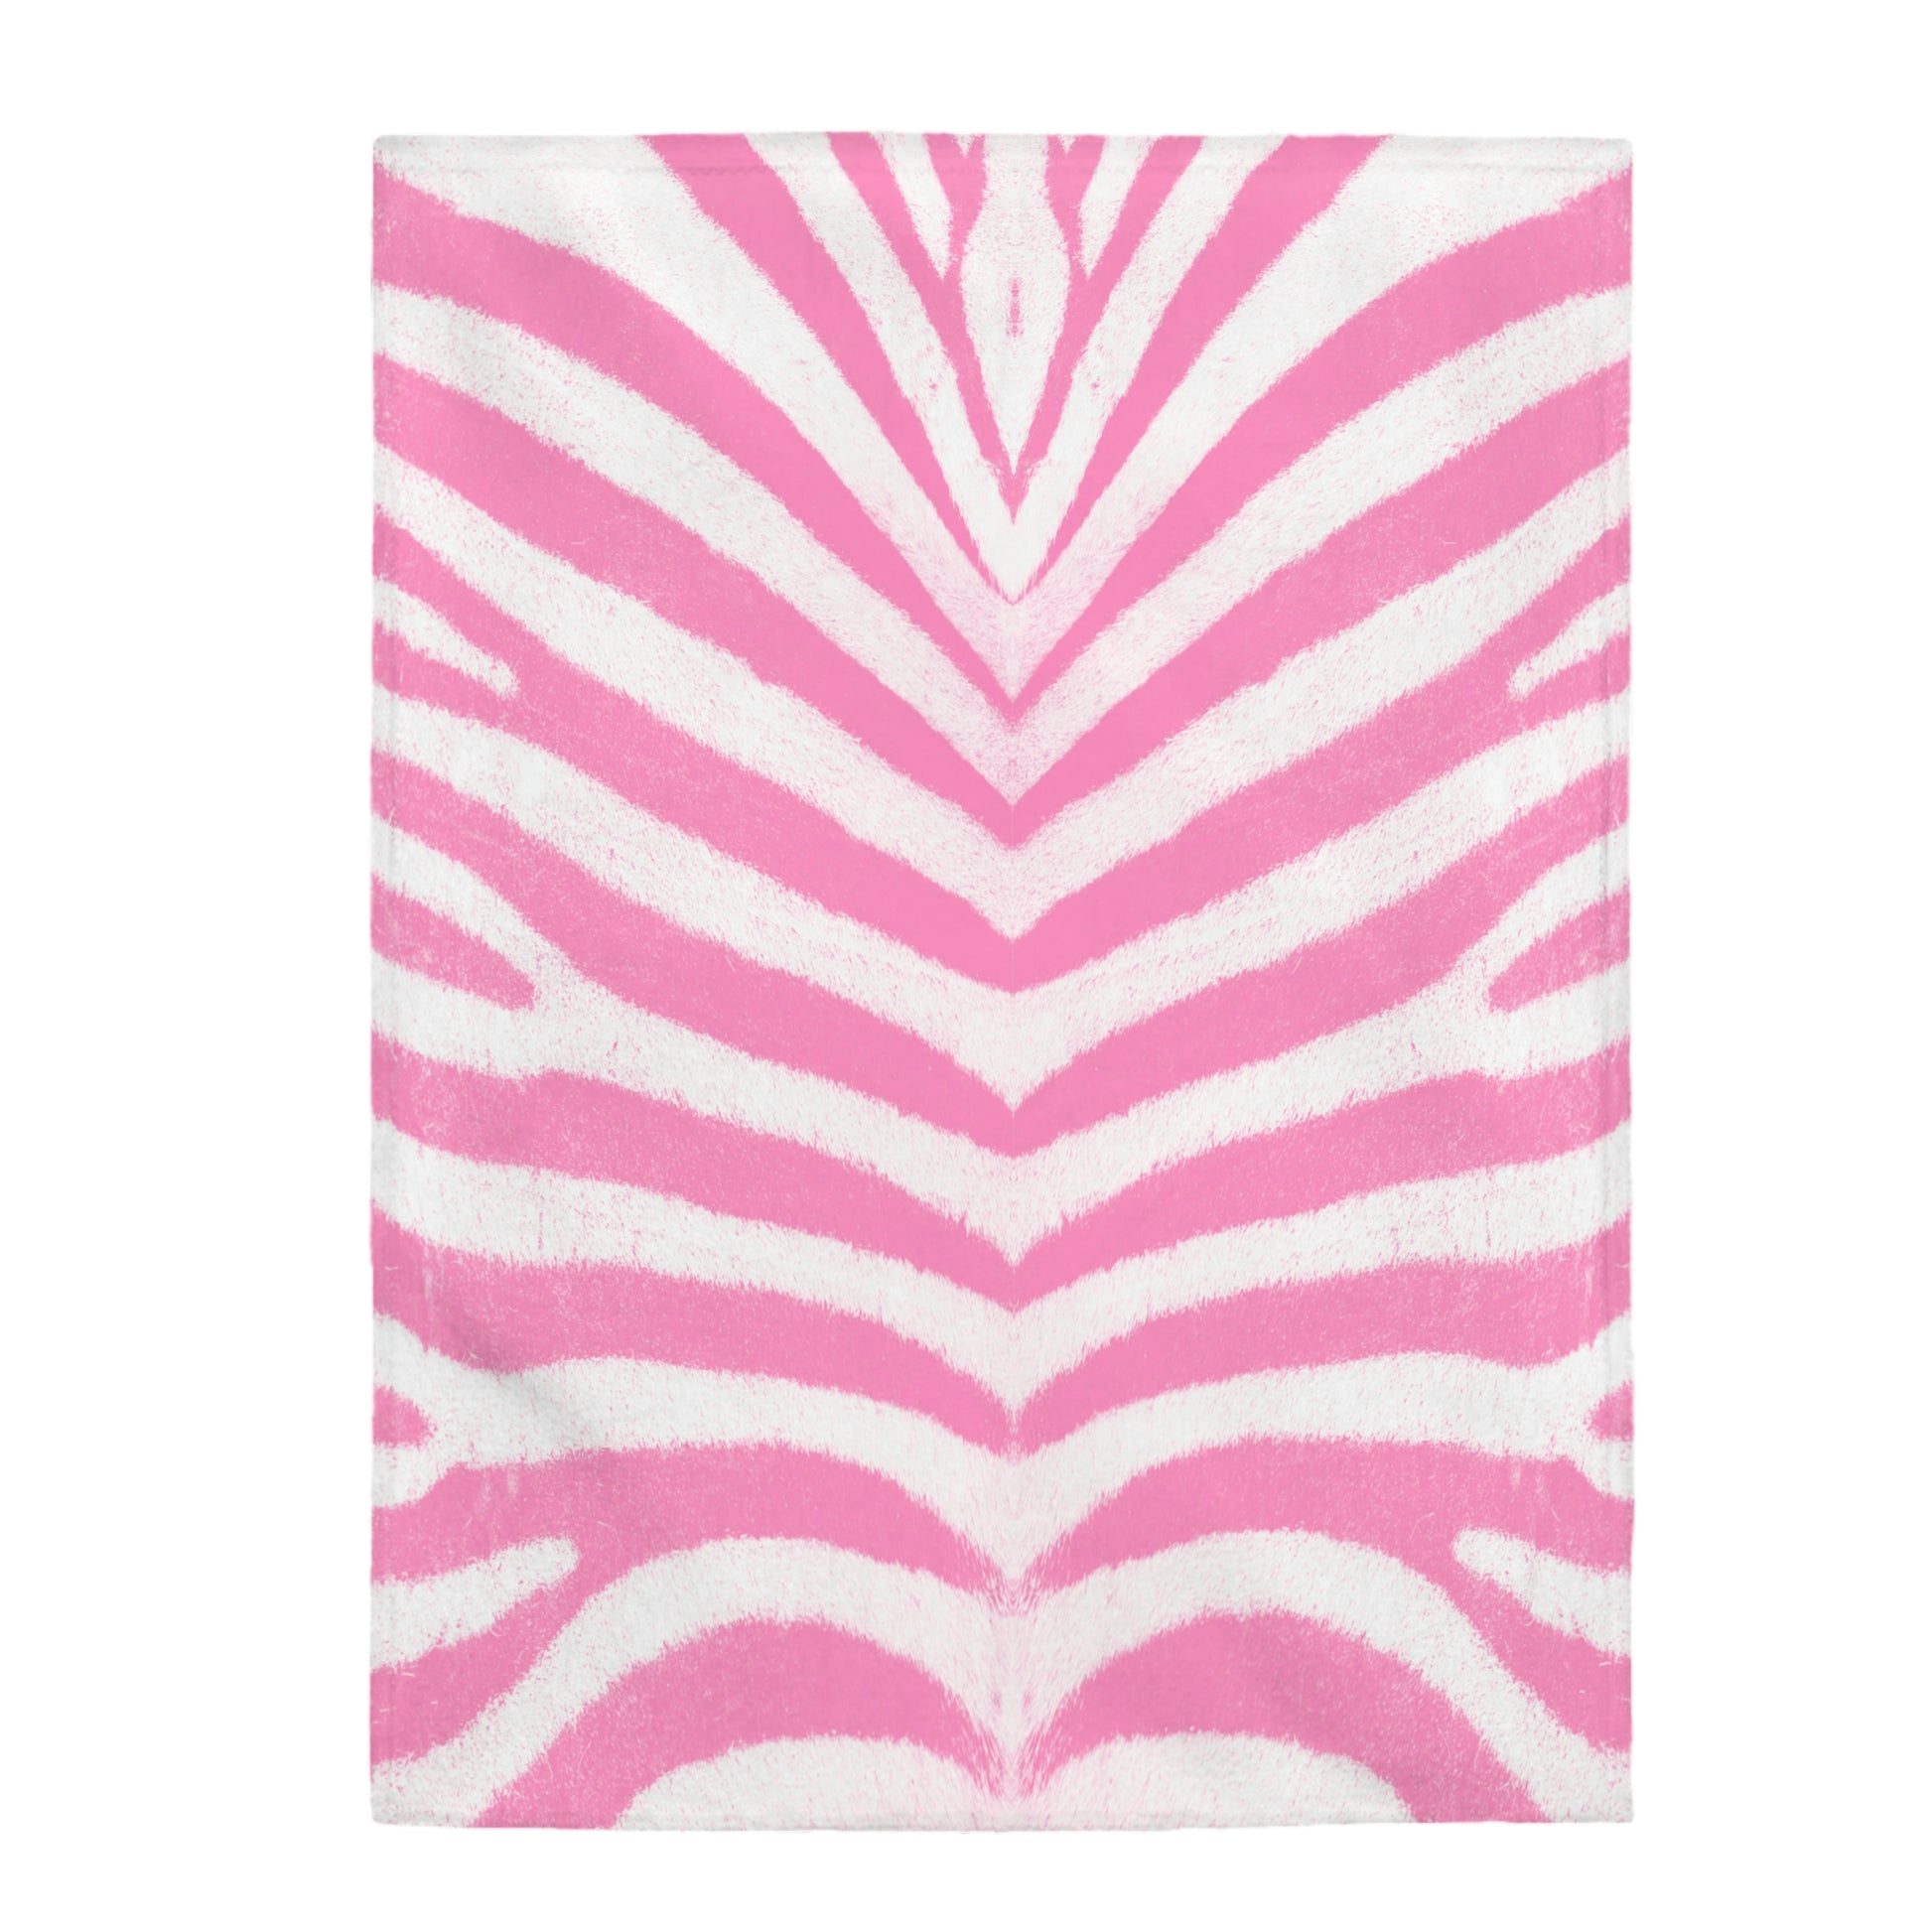 PINK AND WHITE STRIPED PLUSH BLANKET - BRYKNOLO LLC All Over Prints 60" × 80"